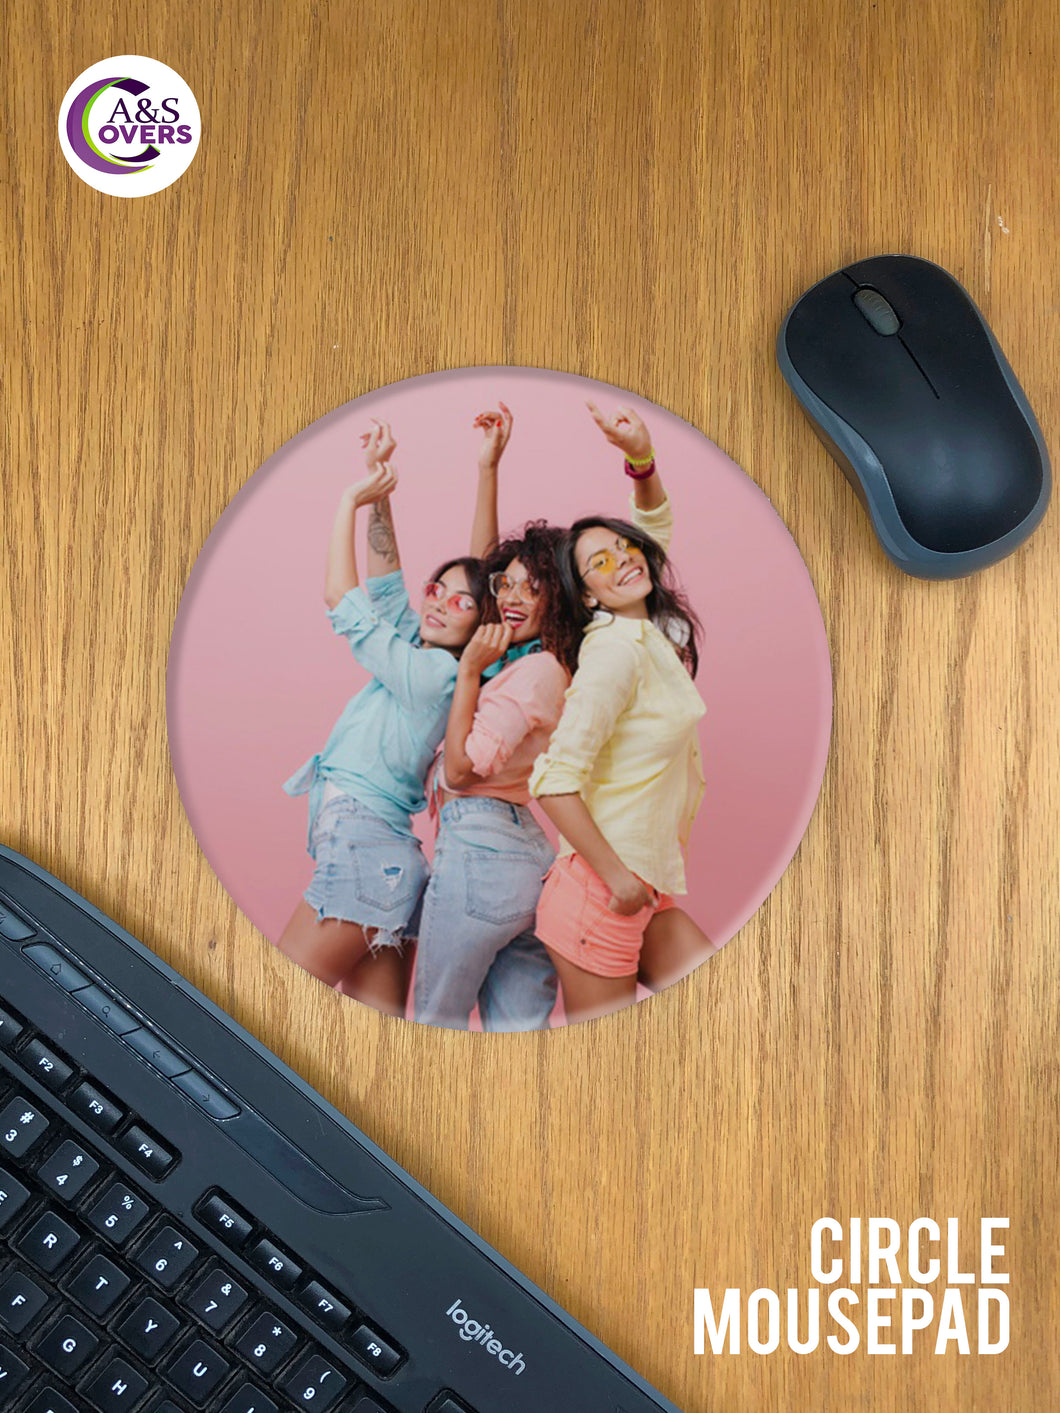 Circle Mouse pad - A&S Covers